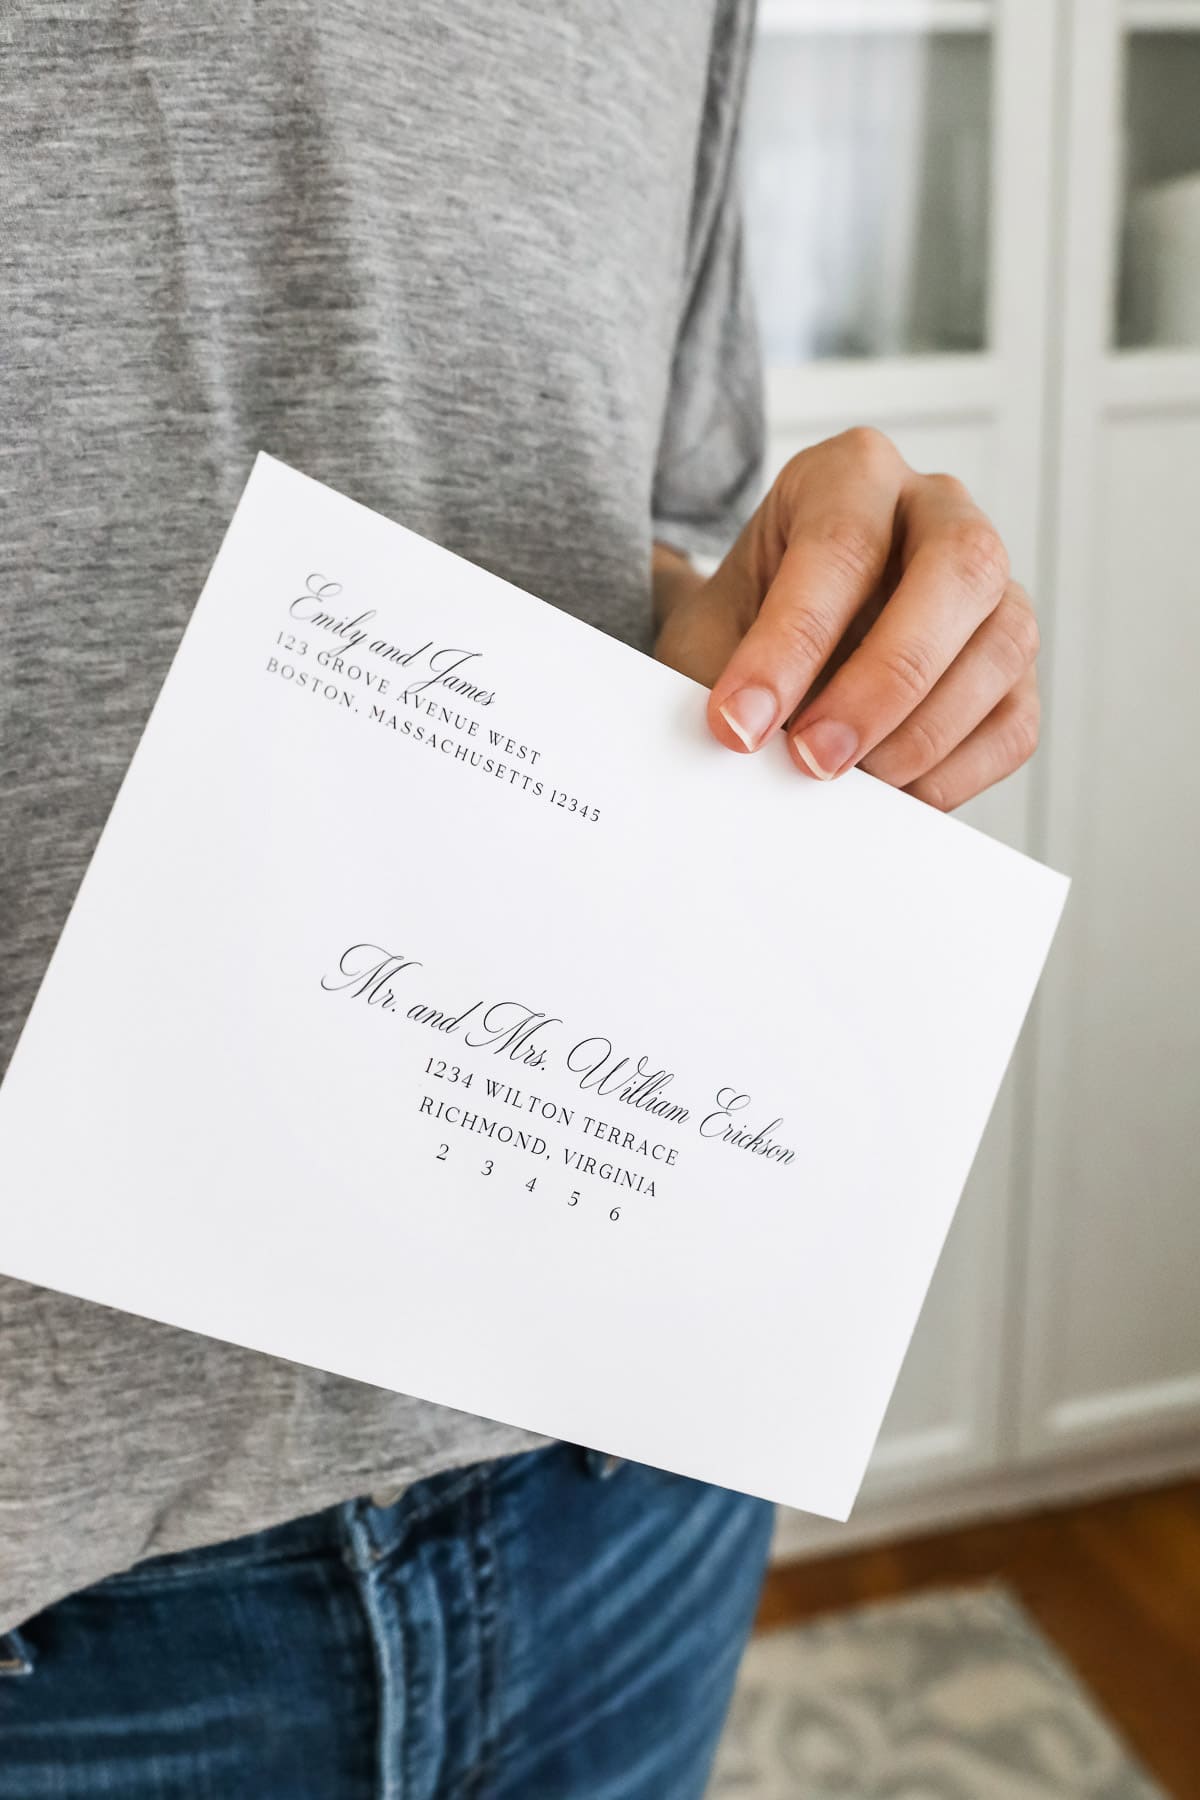 Why hire a professional calligrapher when you can make your own printable envelope template and address your wedding invitations at home for free